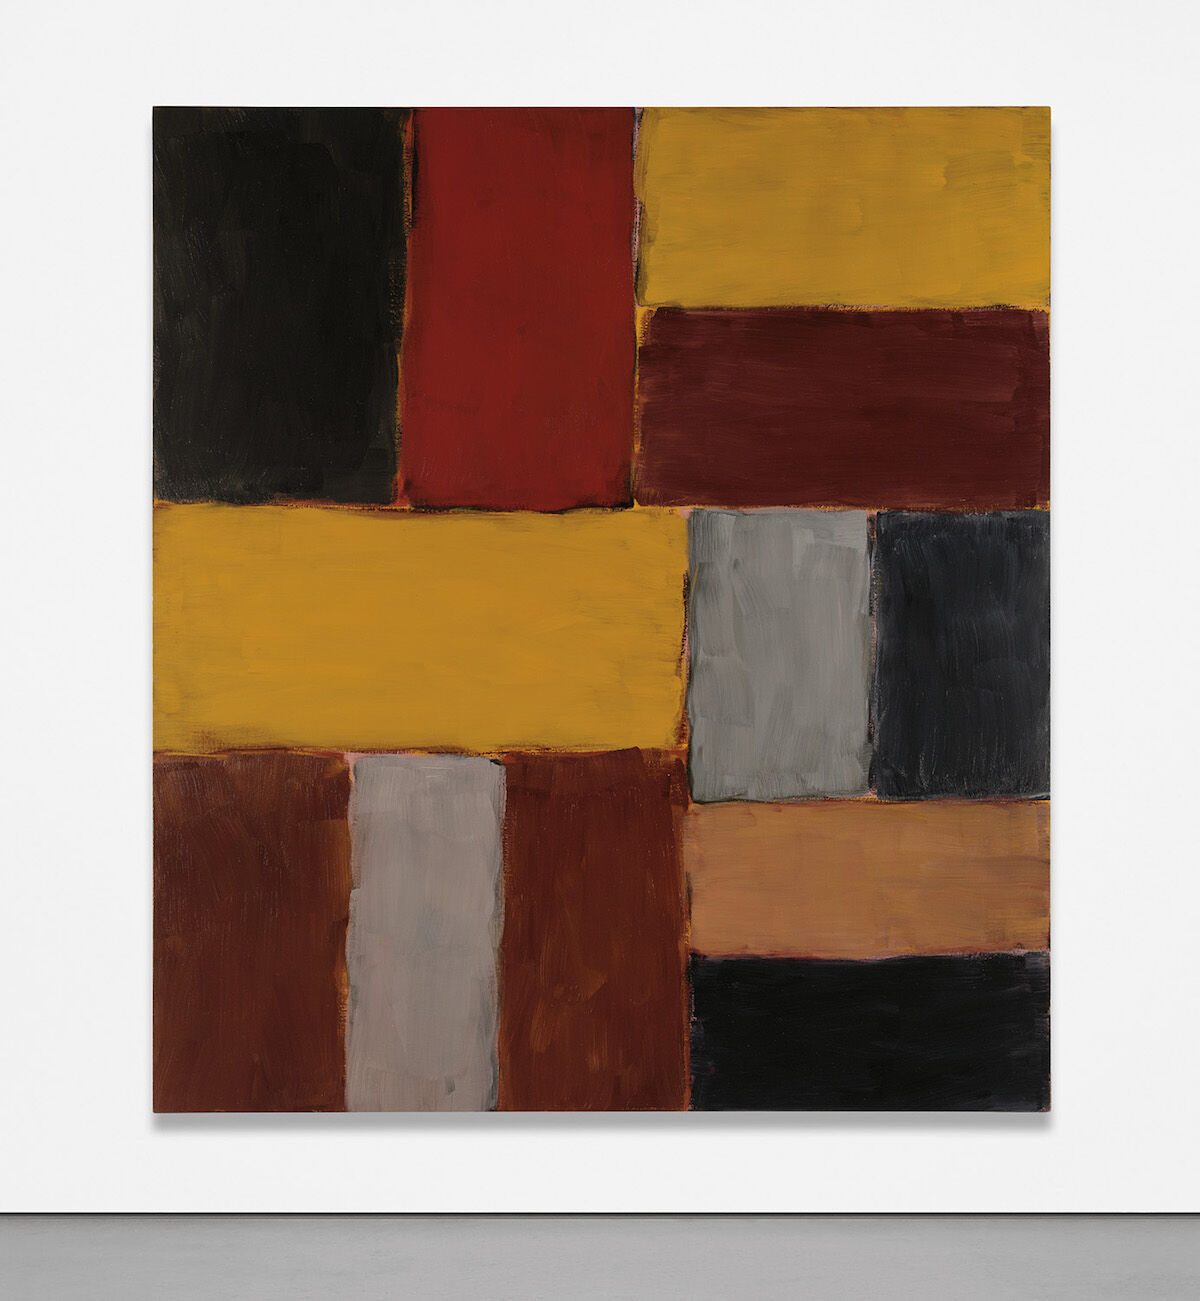 Sean Scully, Red Bar, 2003–04. Sold for $1.7 million. Courtesy Phillips.